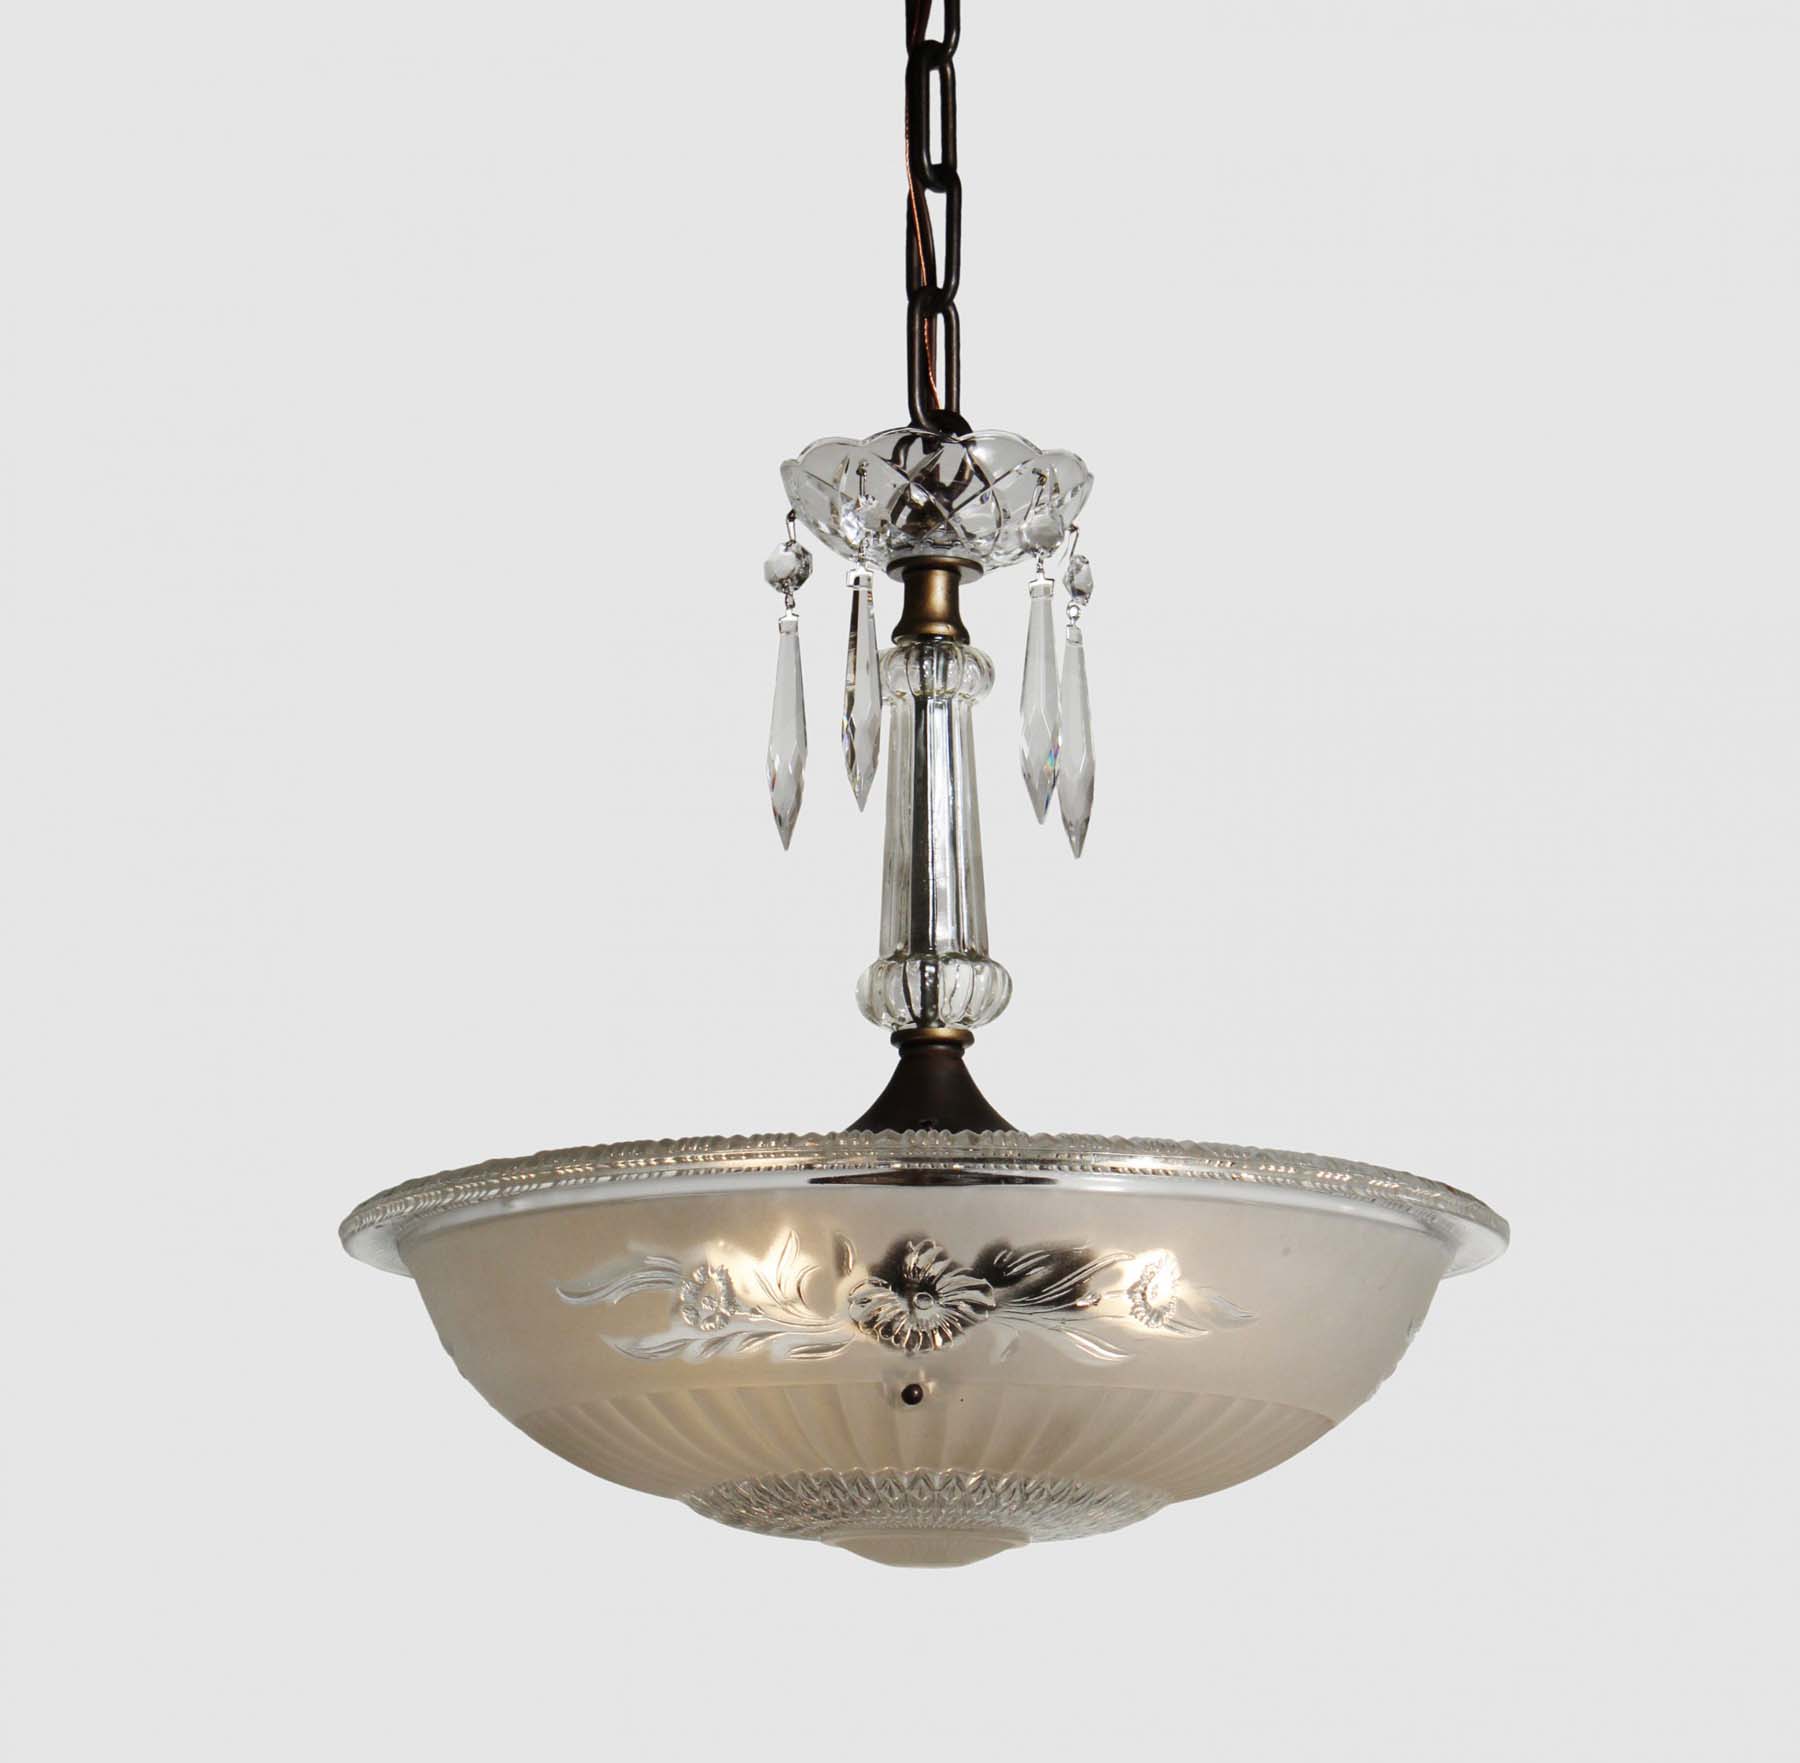 SOLD Vintage Pendant Lights with Original Glass Shades-68108